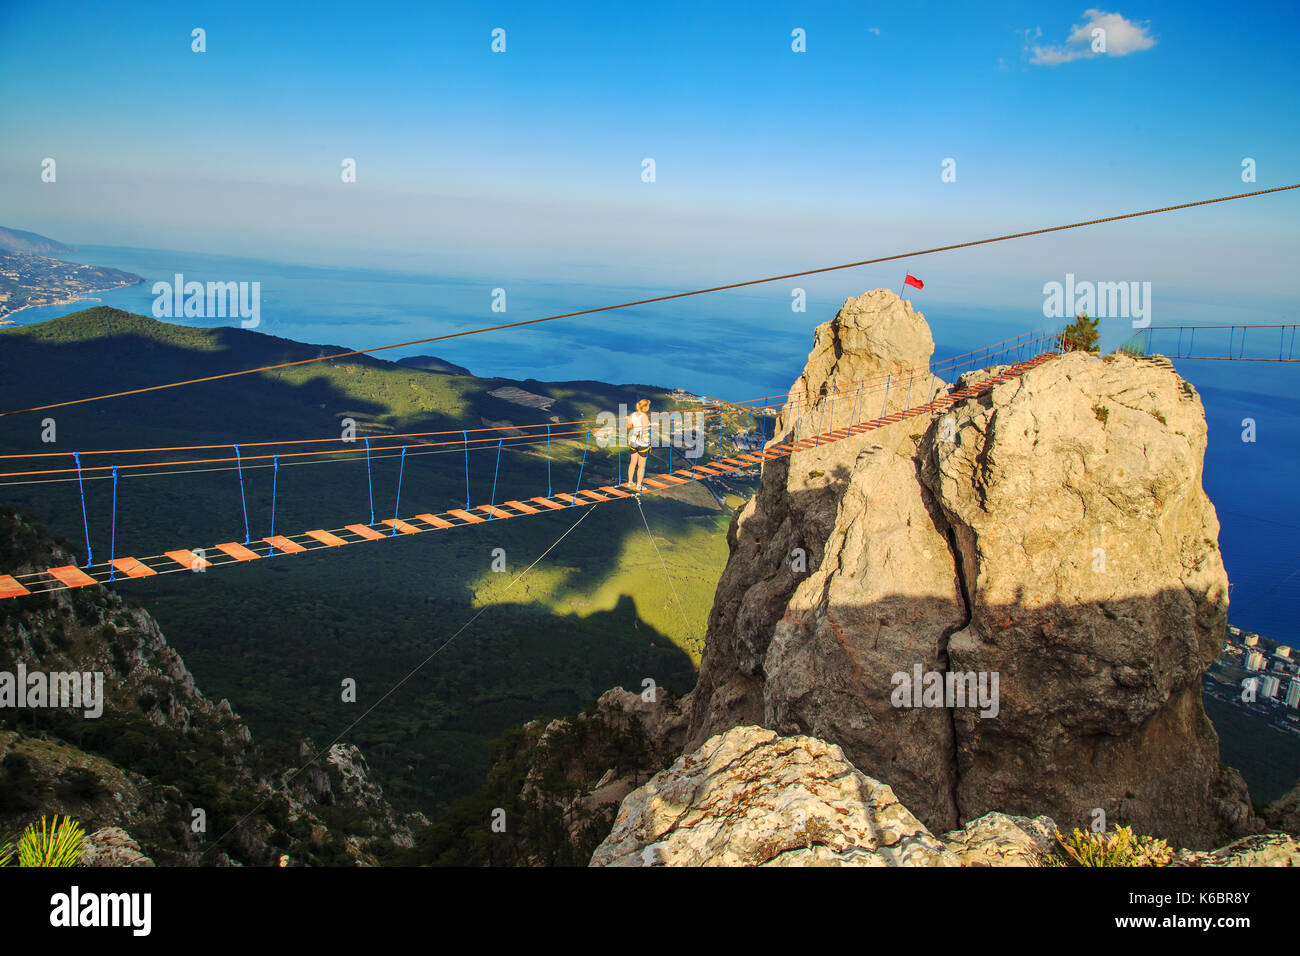 Woman is walking along a suspension bridge over an abyss. Yalta, the Crimea. The concept of risk and danger. Stock Photo